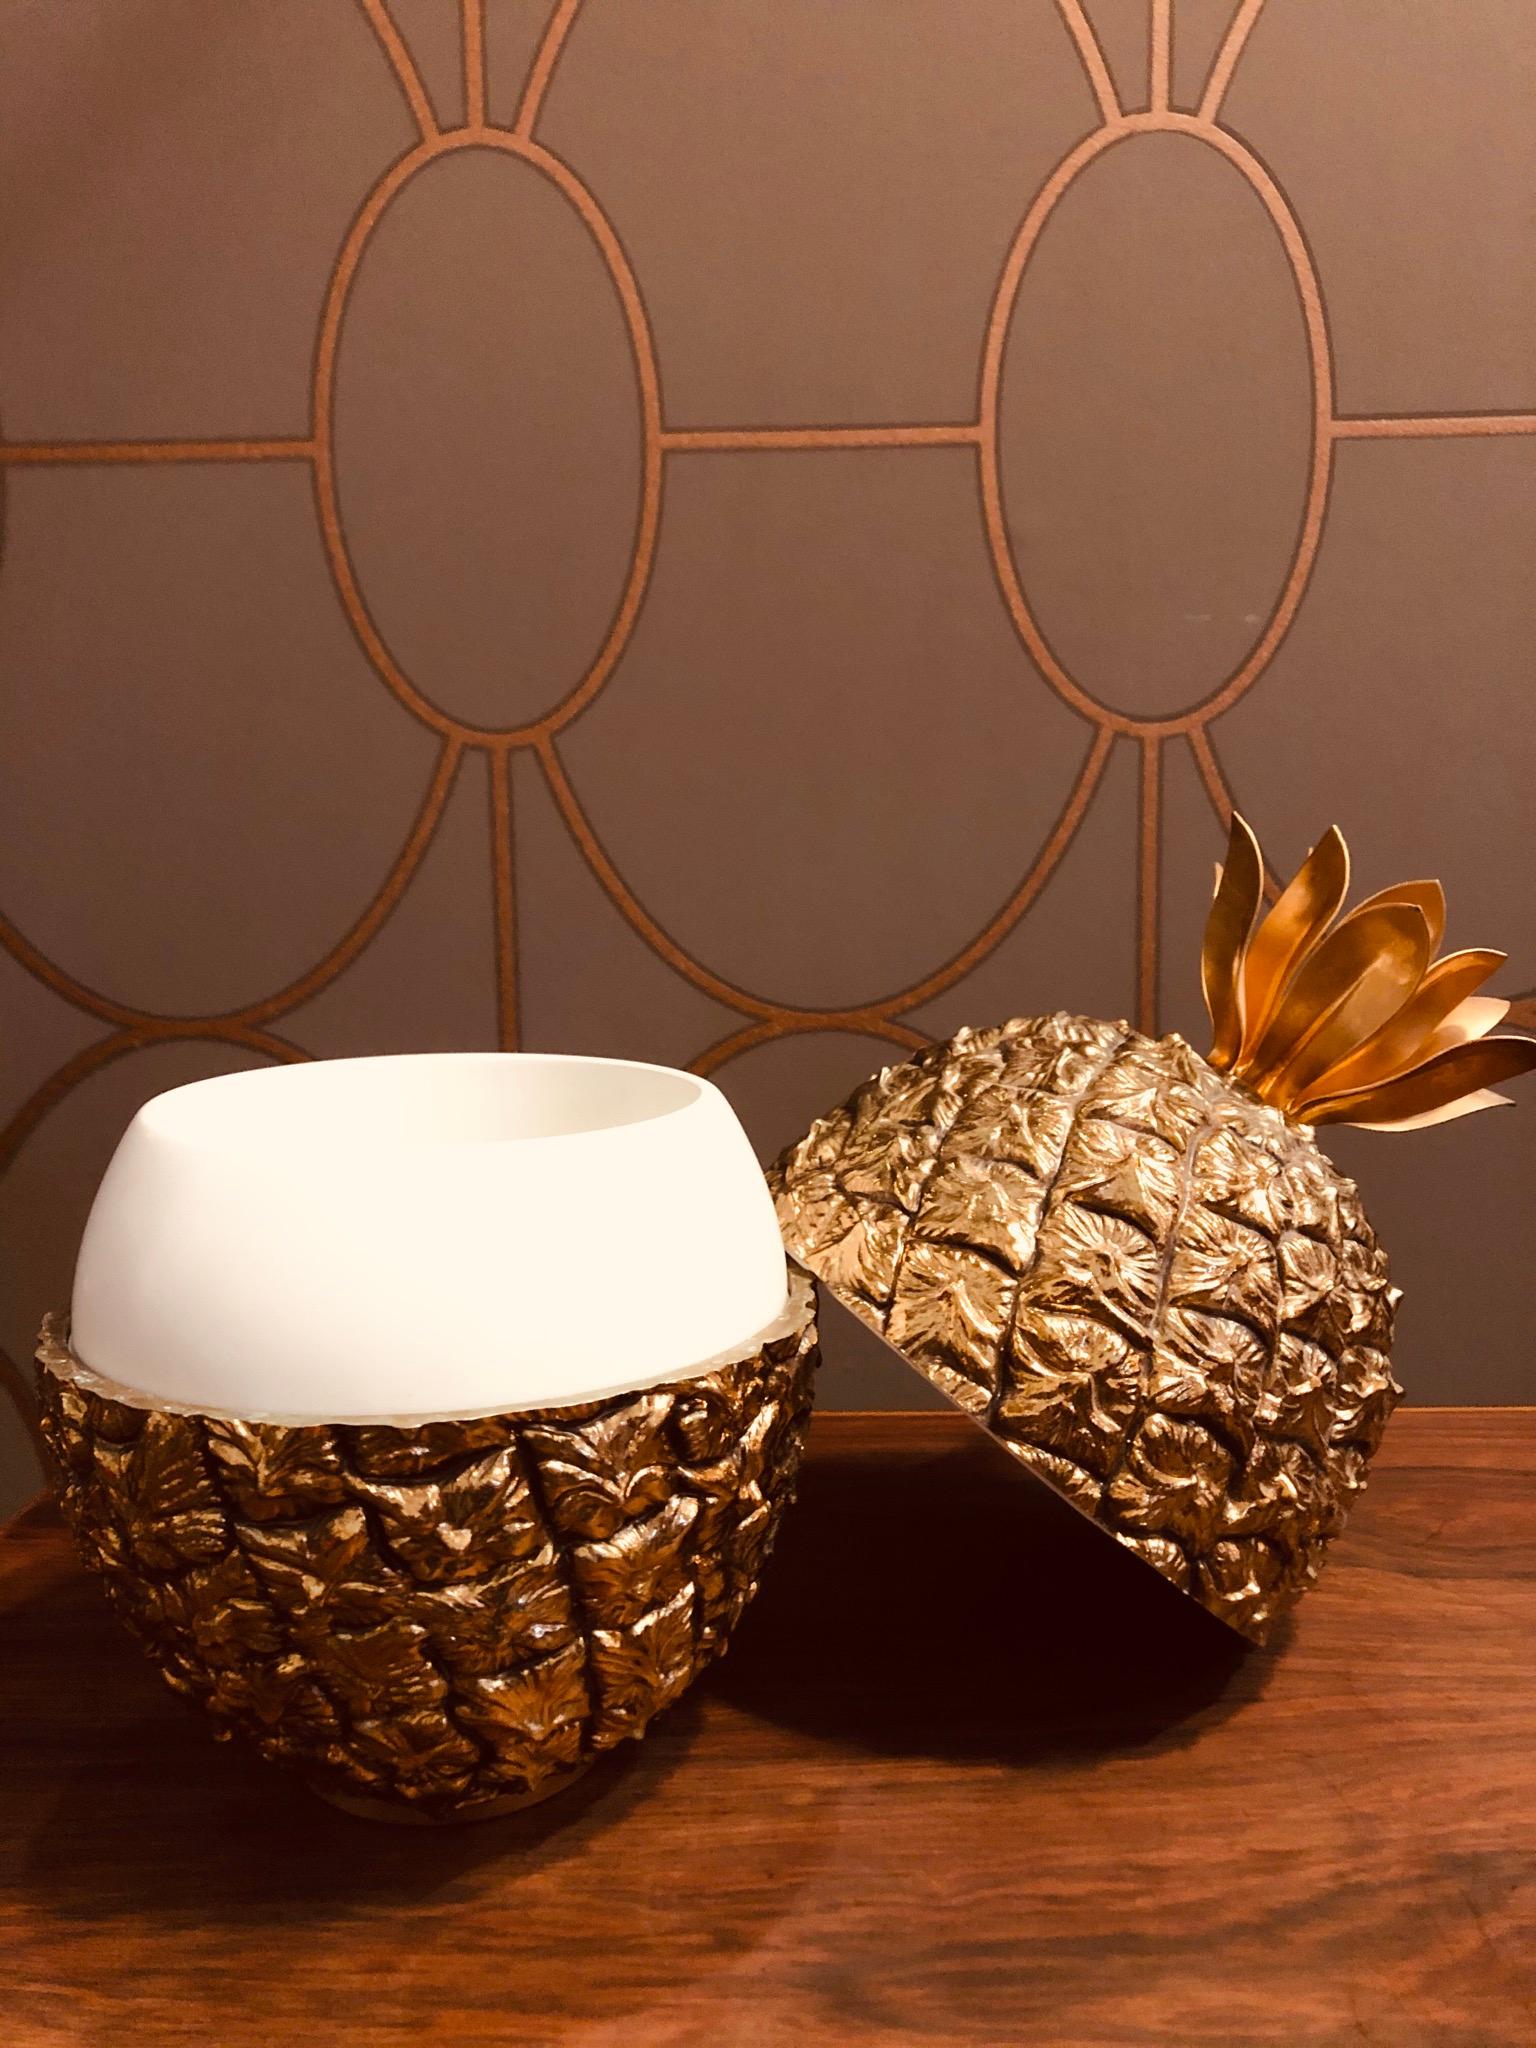 Beautiful golden pineapple ice bucket designed by French designer Michel Dartois. This detailed pineapple like ice bucket is a beautiful luxurious appeal add-on for you bar, or as a decoration piece. Very good condition, labeled on the inside.